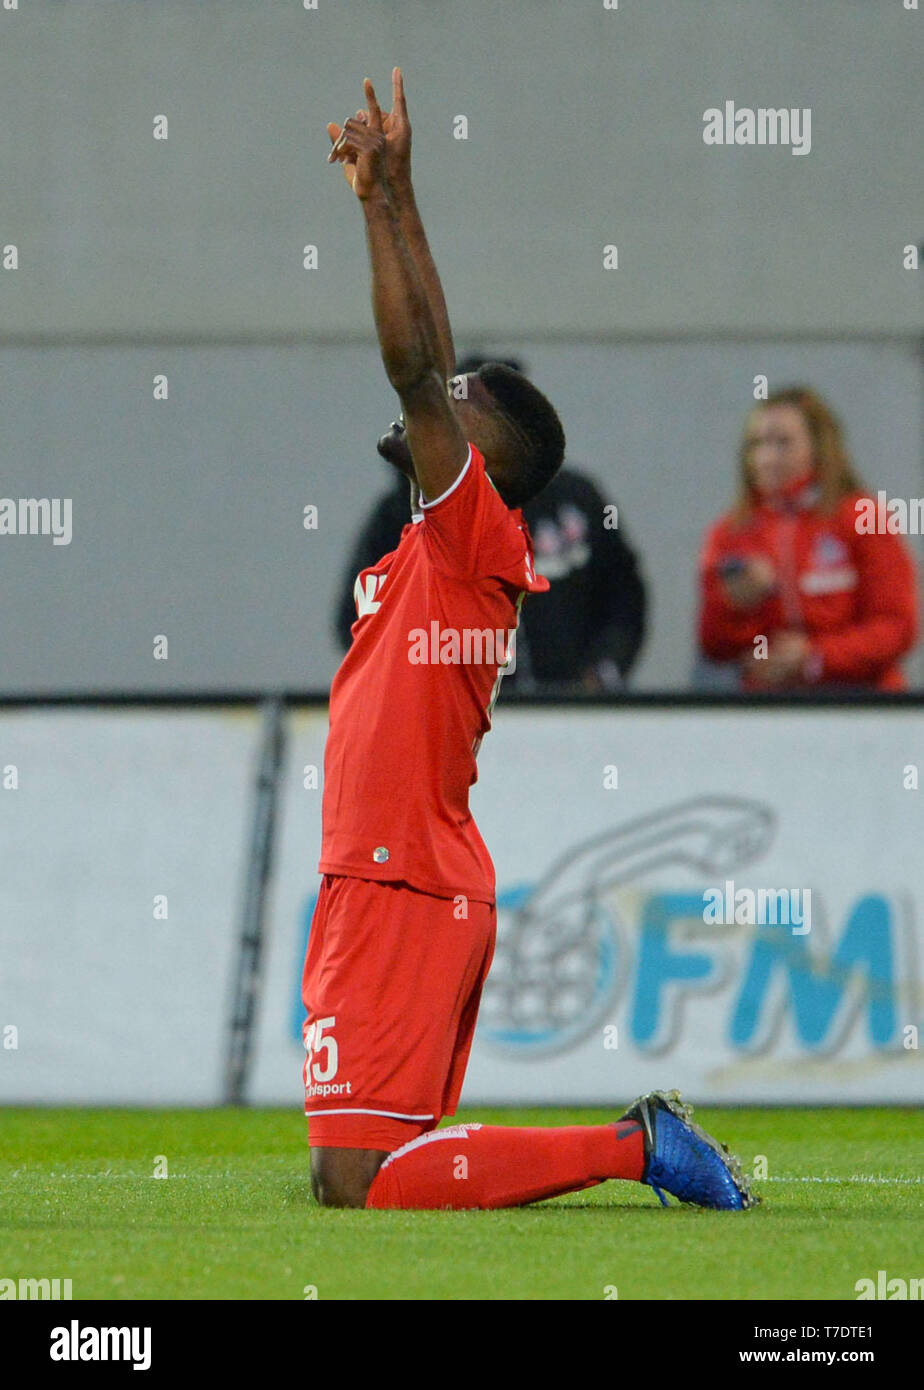 06 May 2019, Bavaria, Fürth: Soccer: 2nd Bundesliga, SpVgg Greuther Fürth - 1st FC Cologne, 32nd matchday at the Sportpark Ronhof Thomas Sommer. Cologne's Jhon Cordoba celebrates his goal to 0:1. IMPORTANT NOTE: In accordance with the requirements of the DFL Deutsche Fußball Liga and the DFB Deutscher Fußball-Bund, it is prohibited to use or have used photos taken in the stadium and/or the match in the form of sequence pictures and/or video-like photo sequences. Photo: Timm Schamberger/dpa Stock Photo